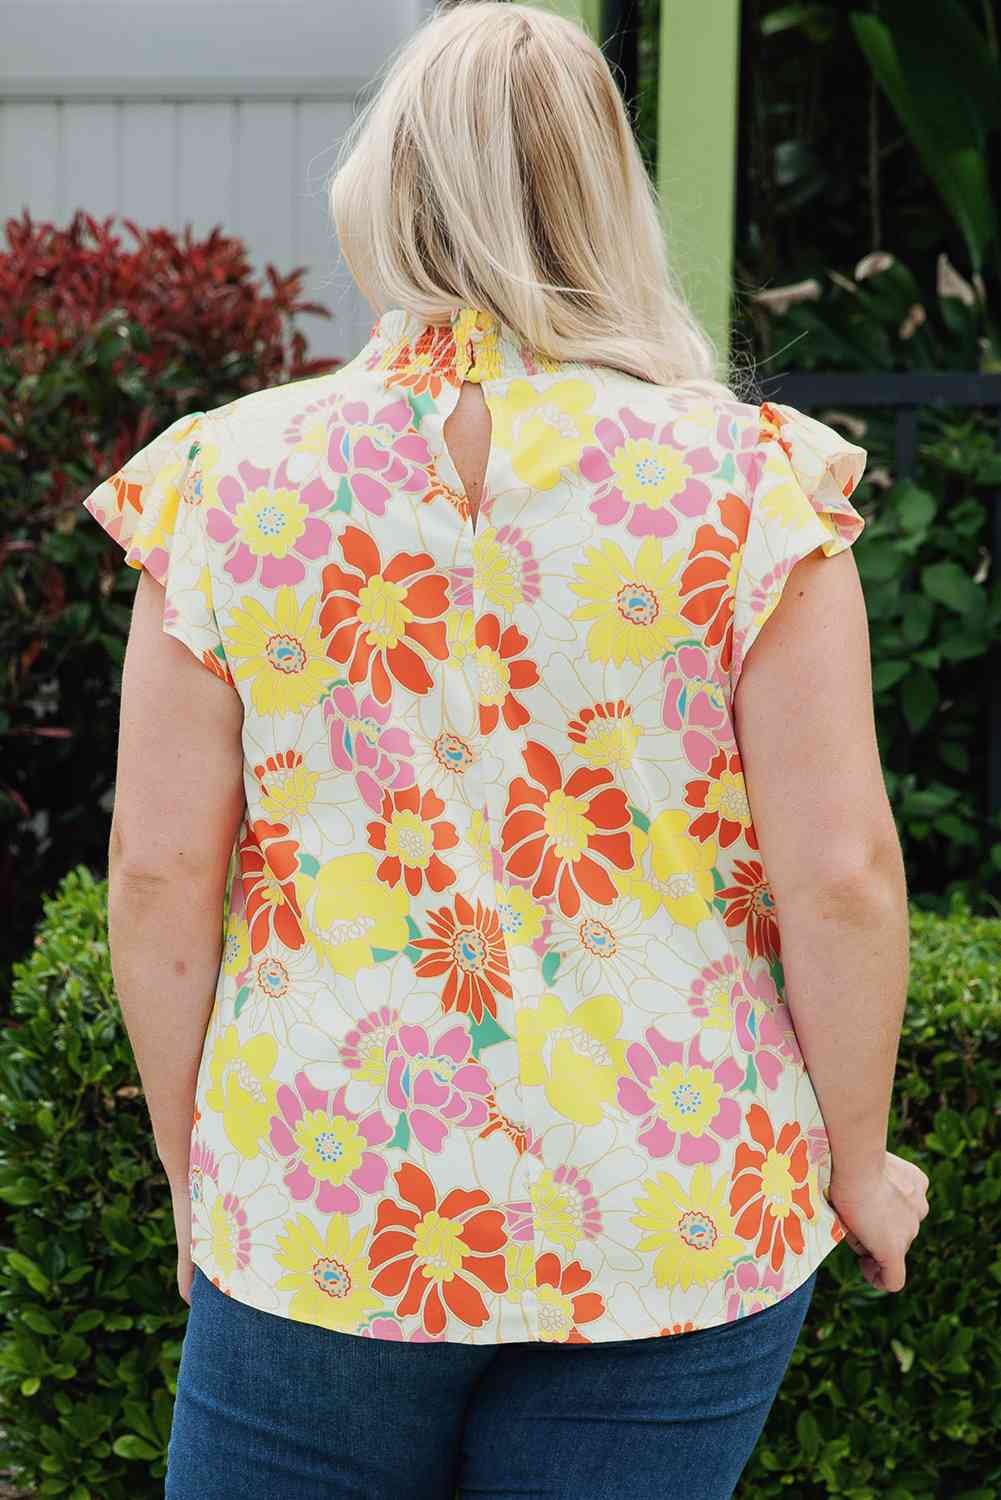 Plus Size Floral Butterfly Sleeve Blouse